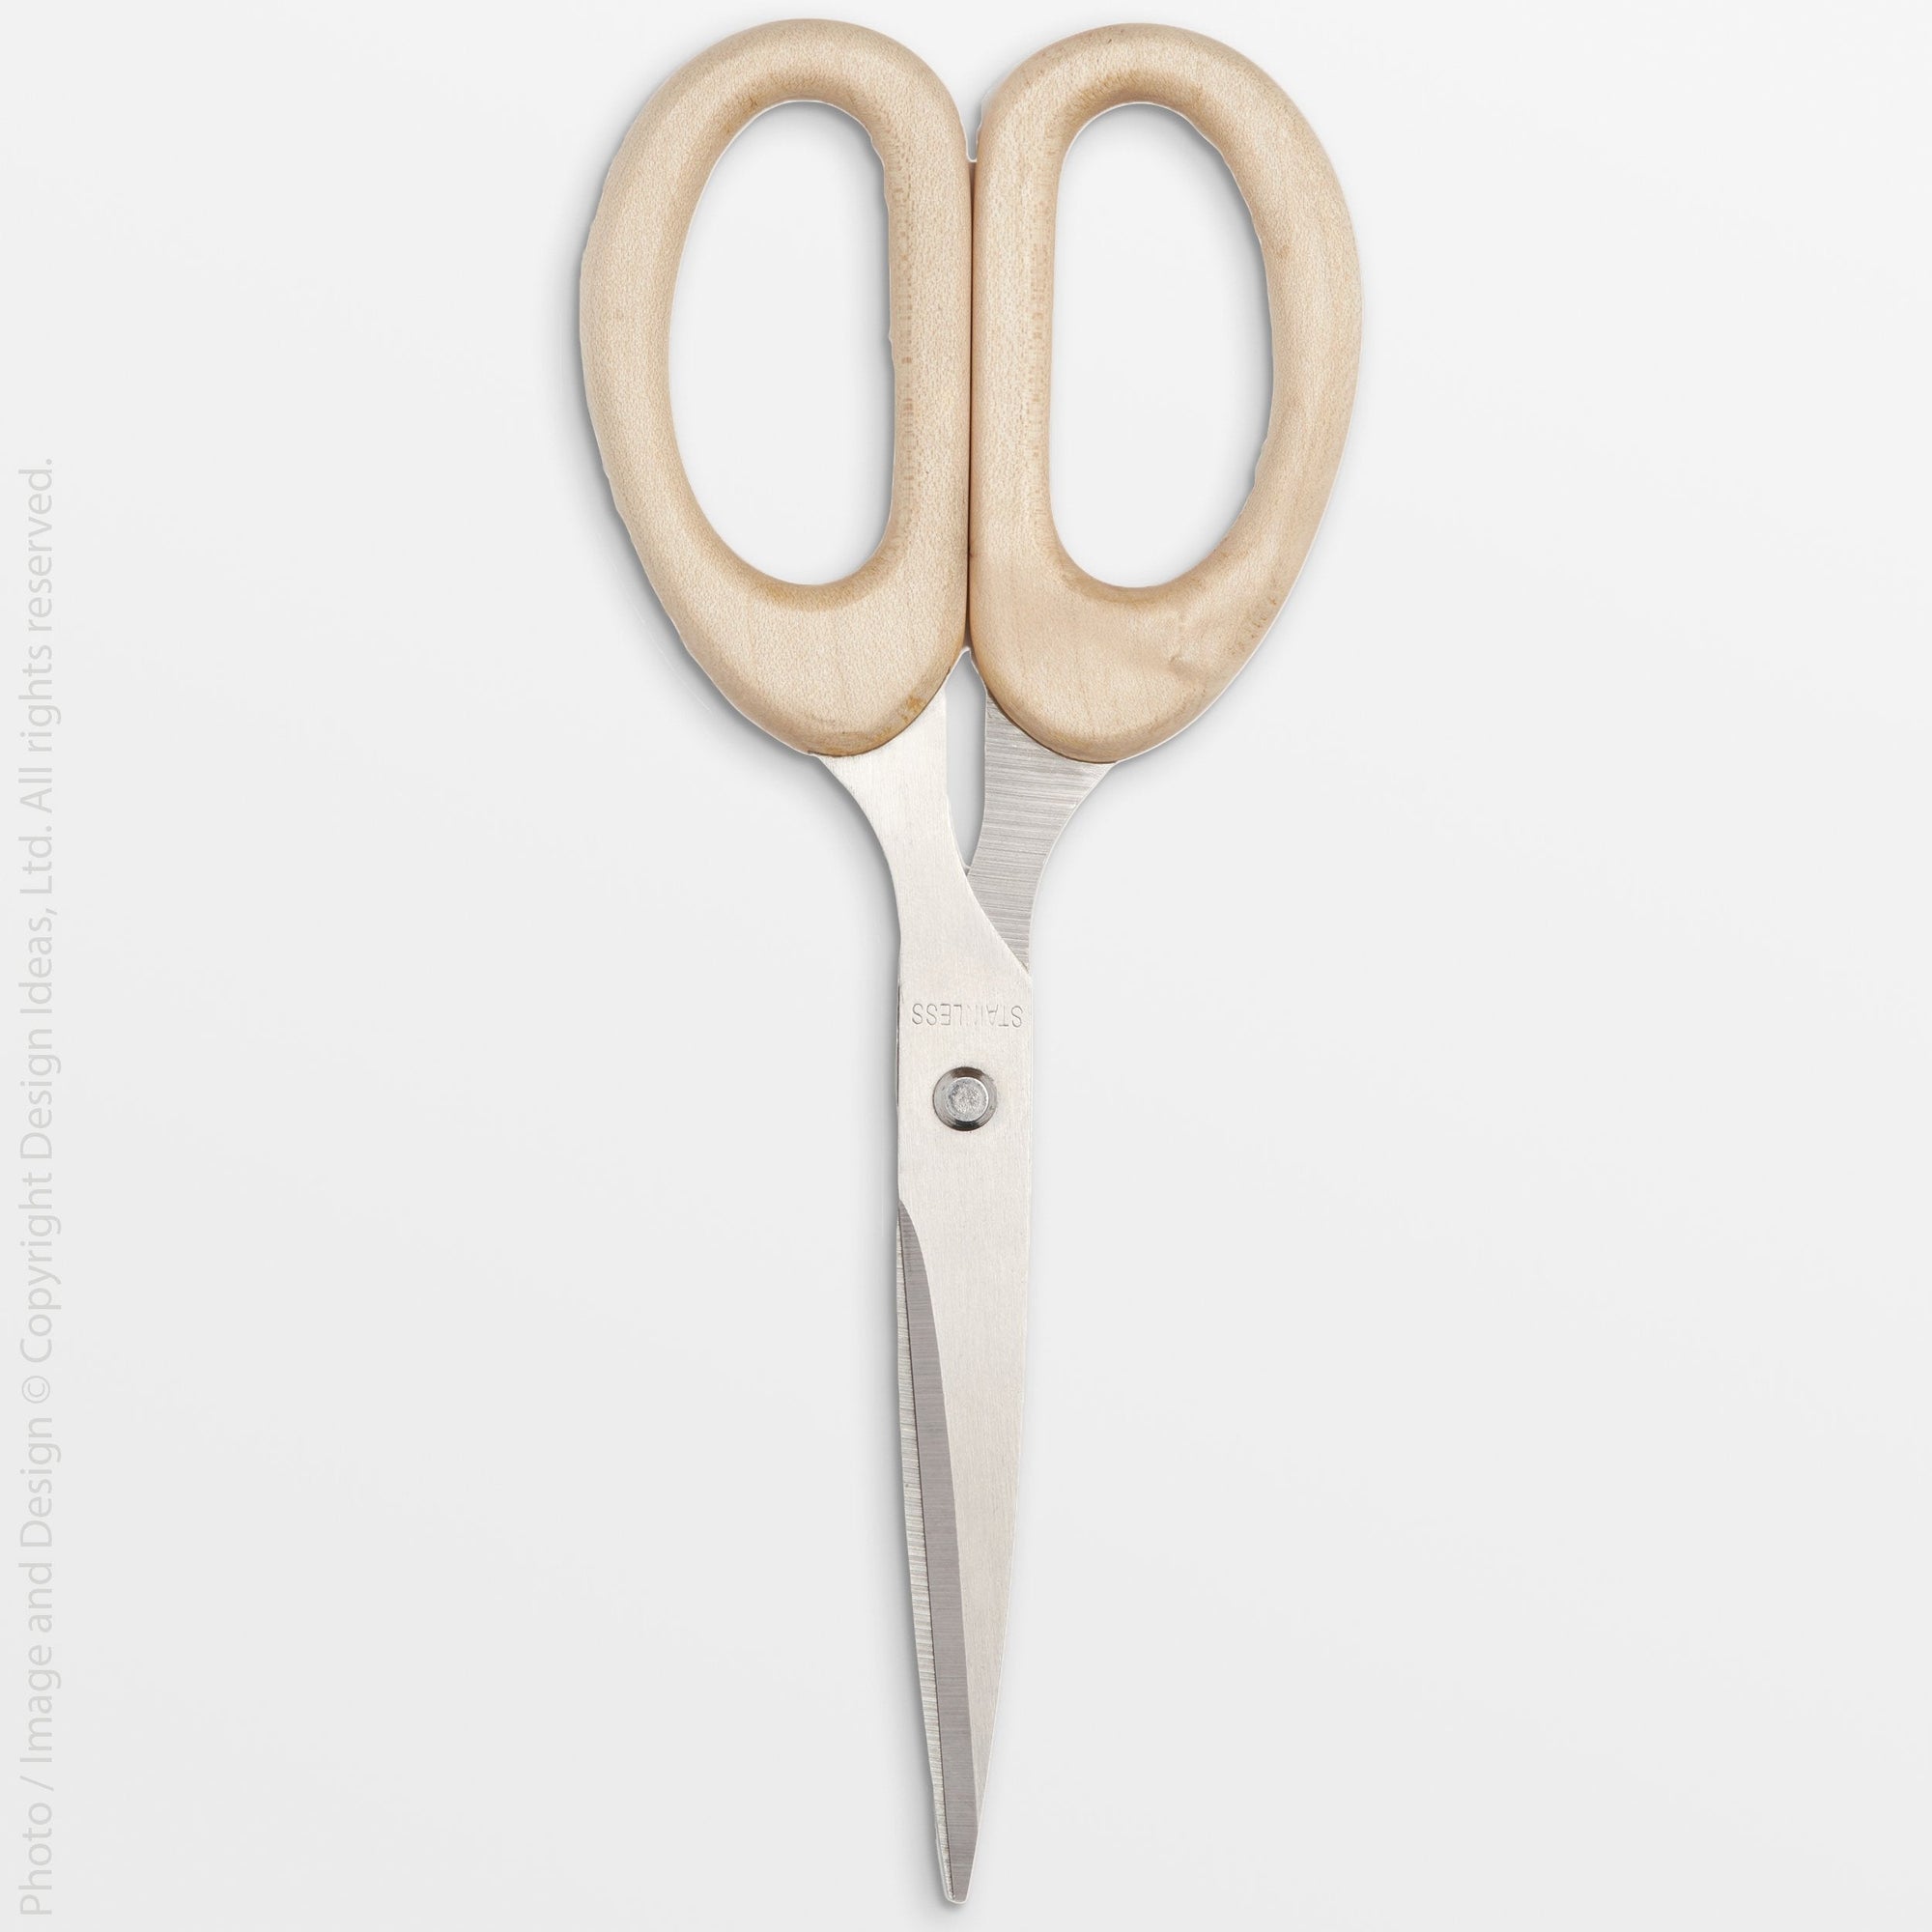 Upland Sycamore Scissors - Natural Color | Image 1 | From the Upland Collection | Expertly created with natural sycamore for long lasting use | Available in natural color | texxture home